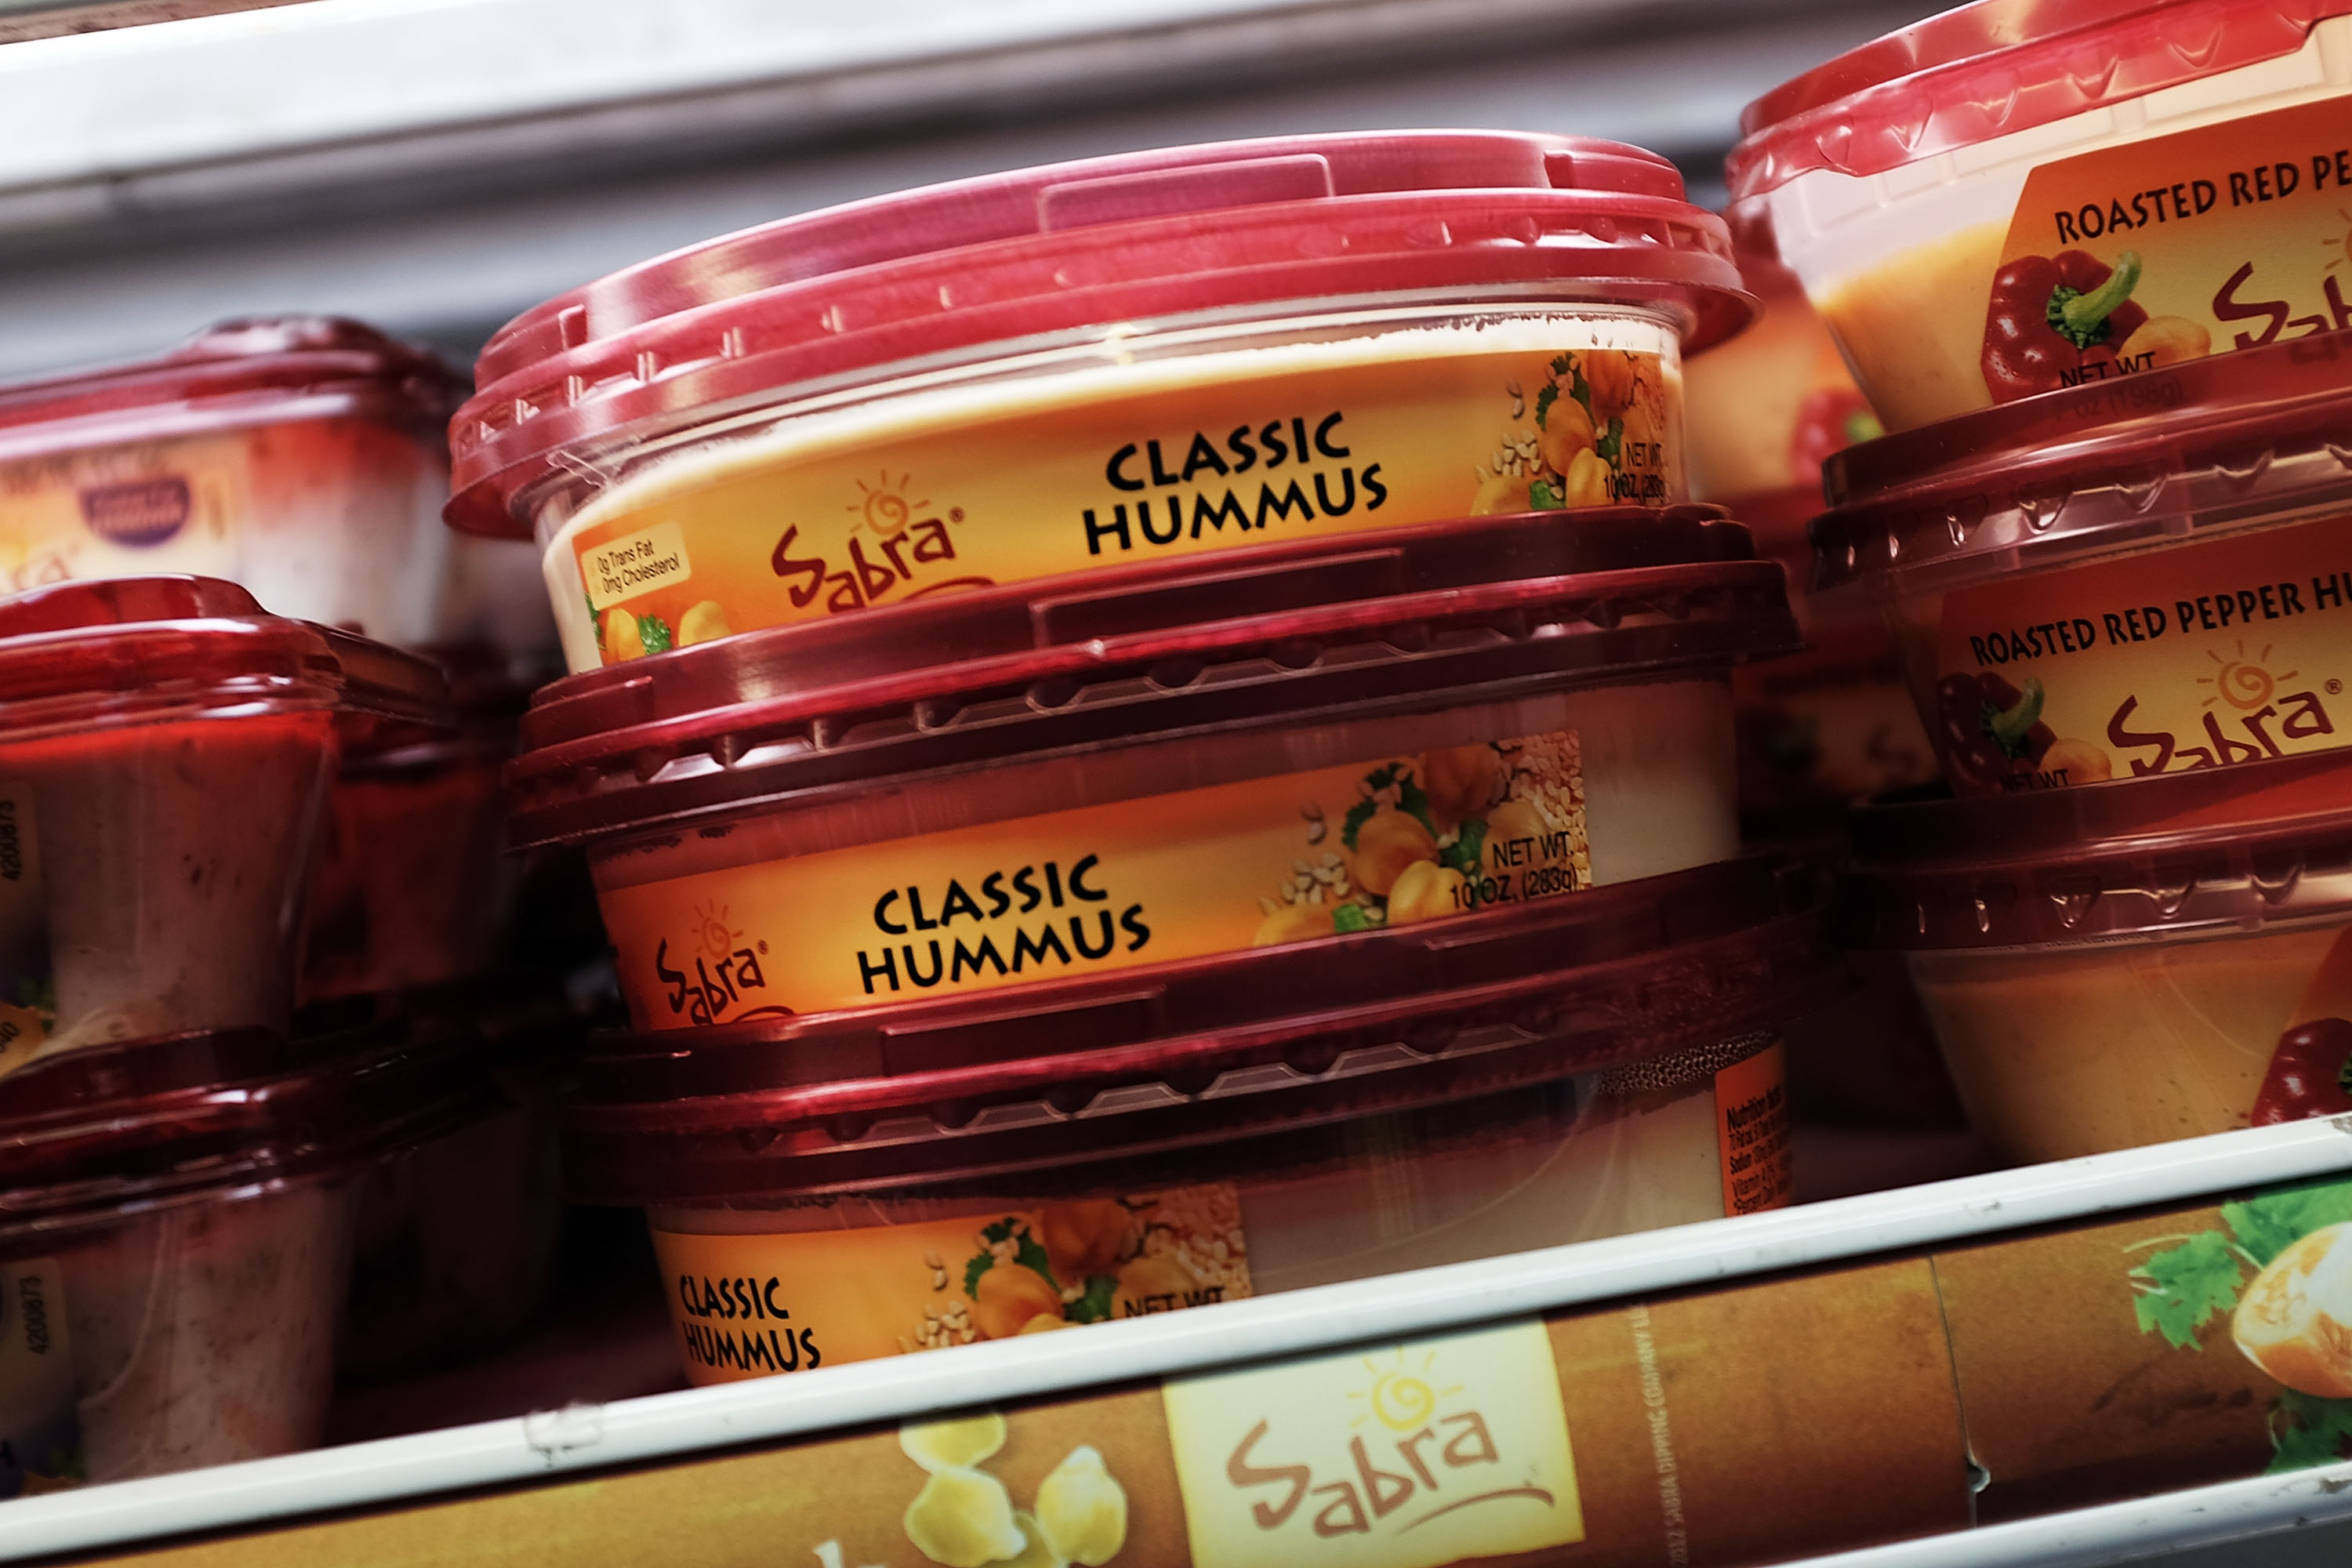 Cases of Sabra Classic Hummus are viewed on the shelf of a grocery store on April 9, 2015 in New York City.